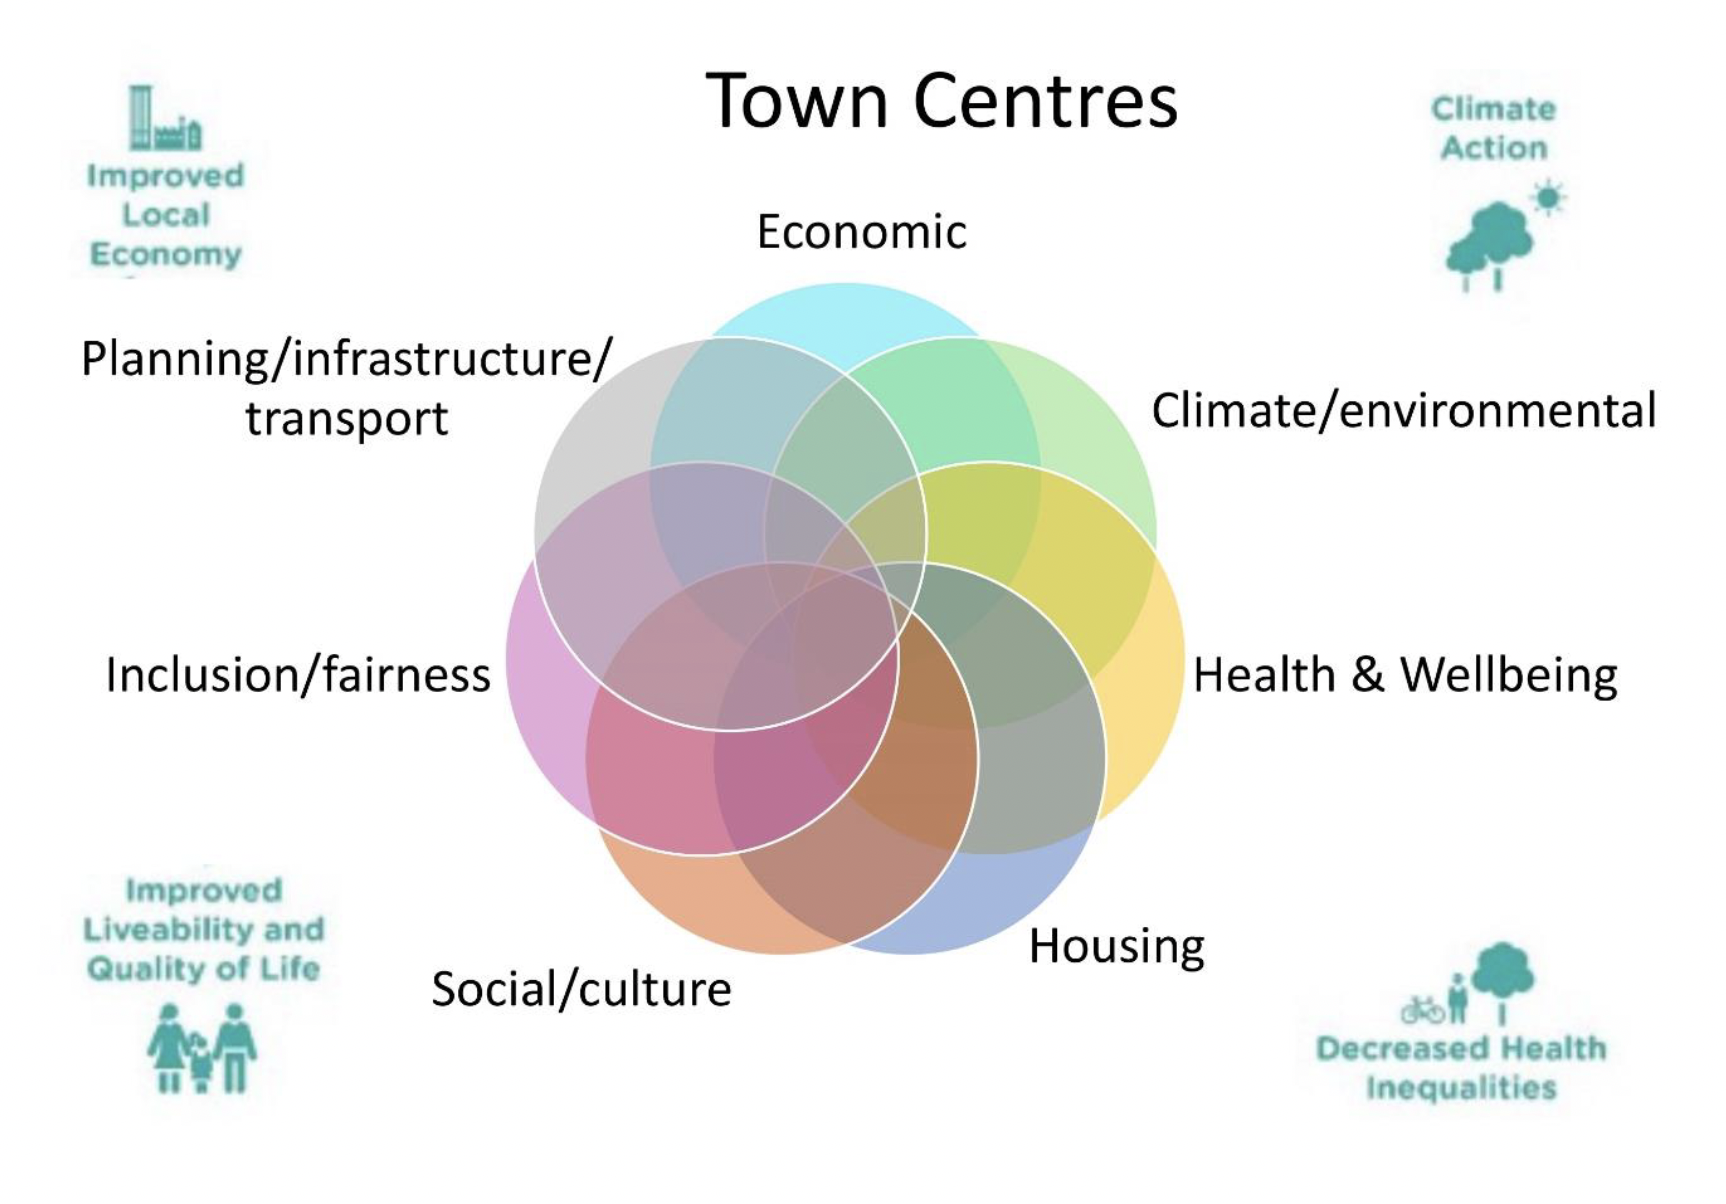 7 overlapping coloured circles: demonstrating how policies interact with one another to impact on a town centre. Surrounding the overlapping circles in the corners are depictions representing Improved Local Economy, Climate Action, Improved Liveability and Quality of Life, Decreased Health Inequalities.  